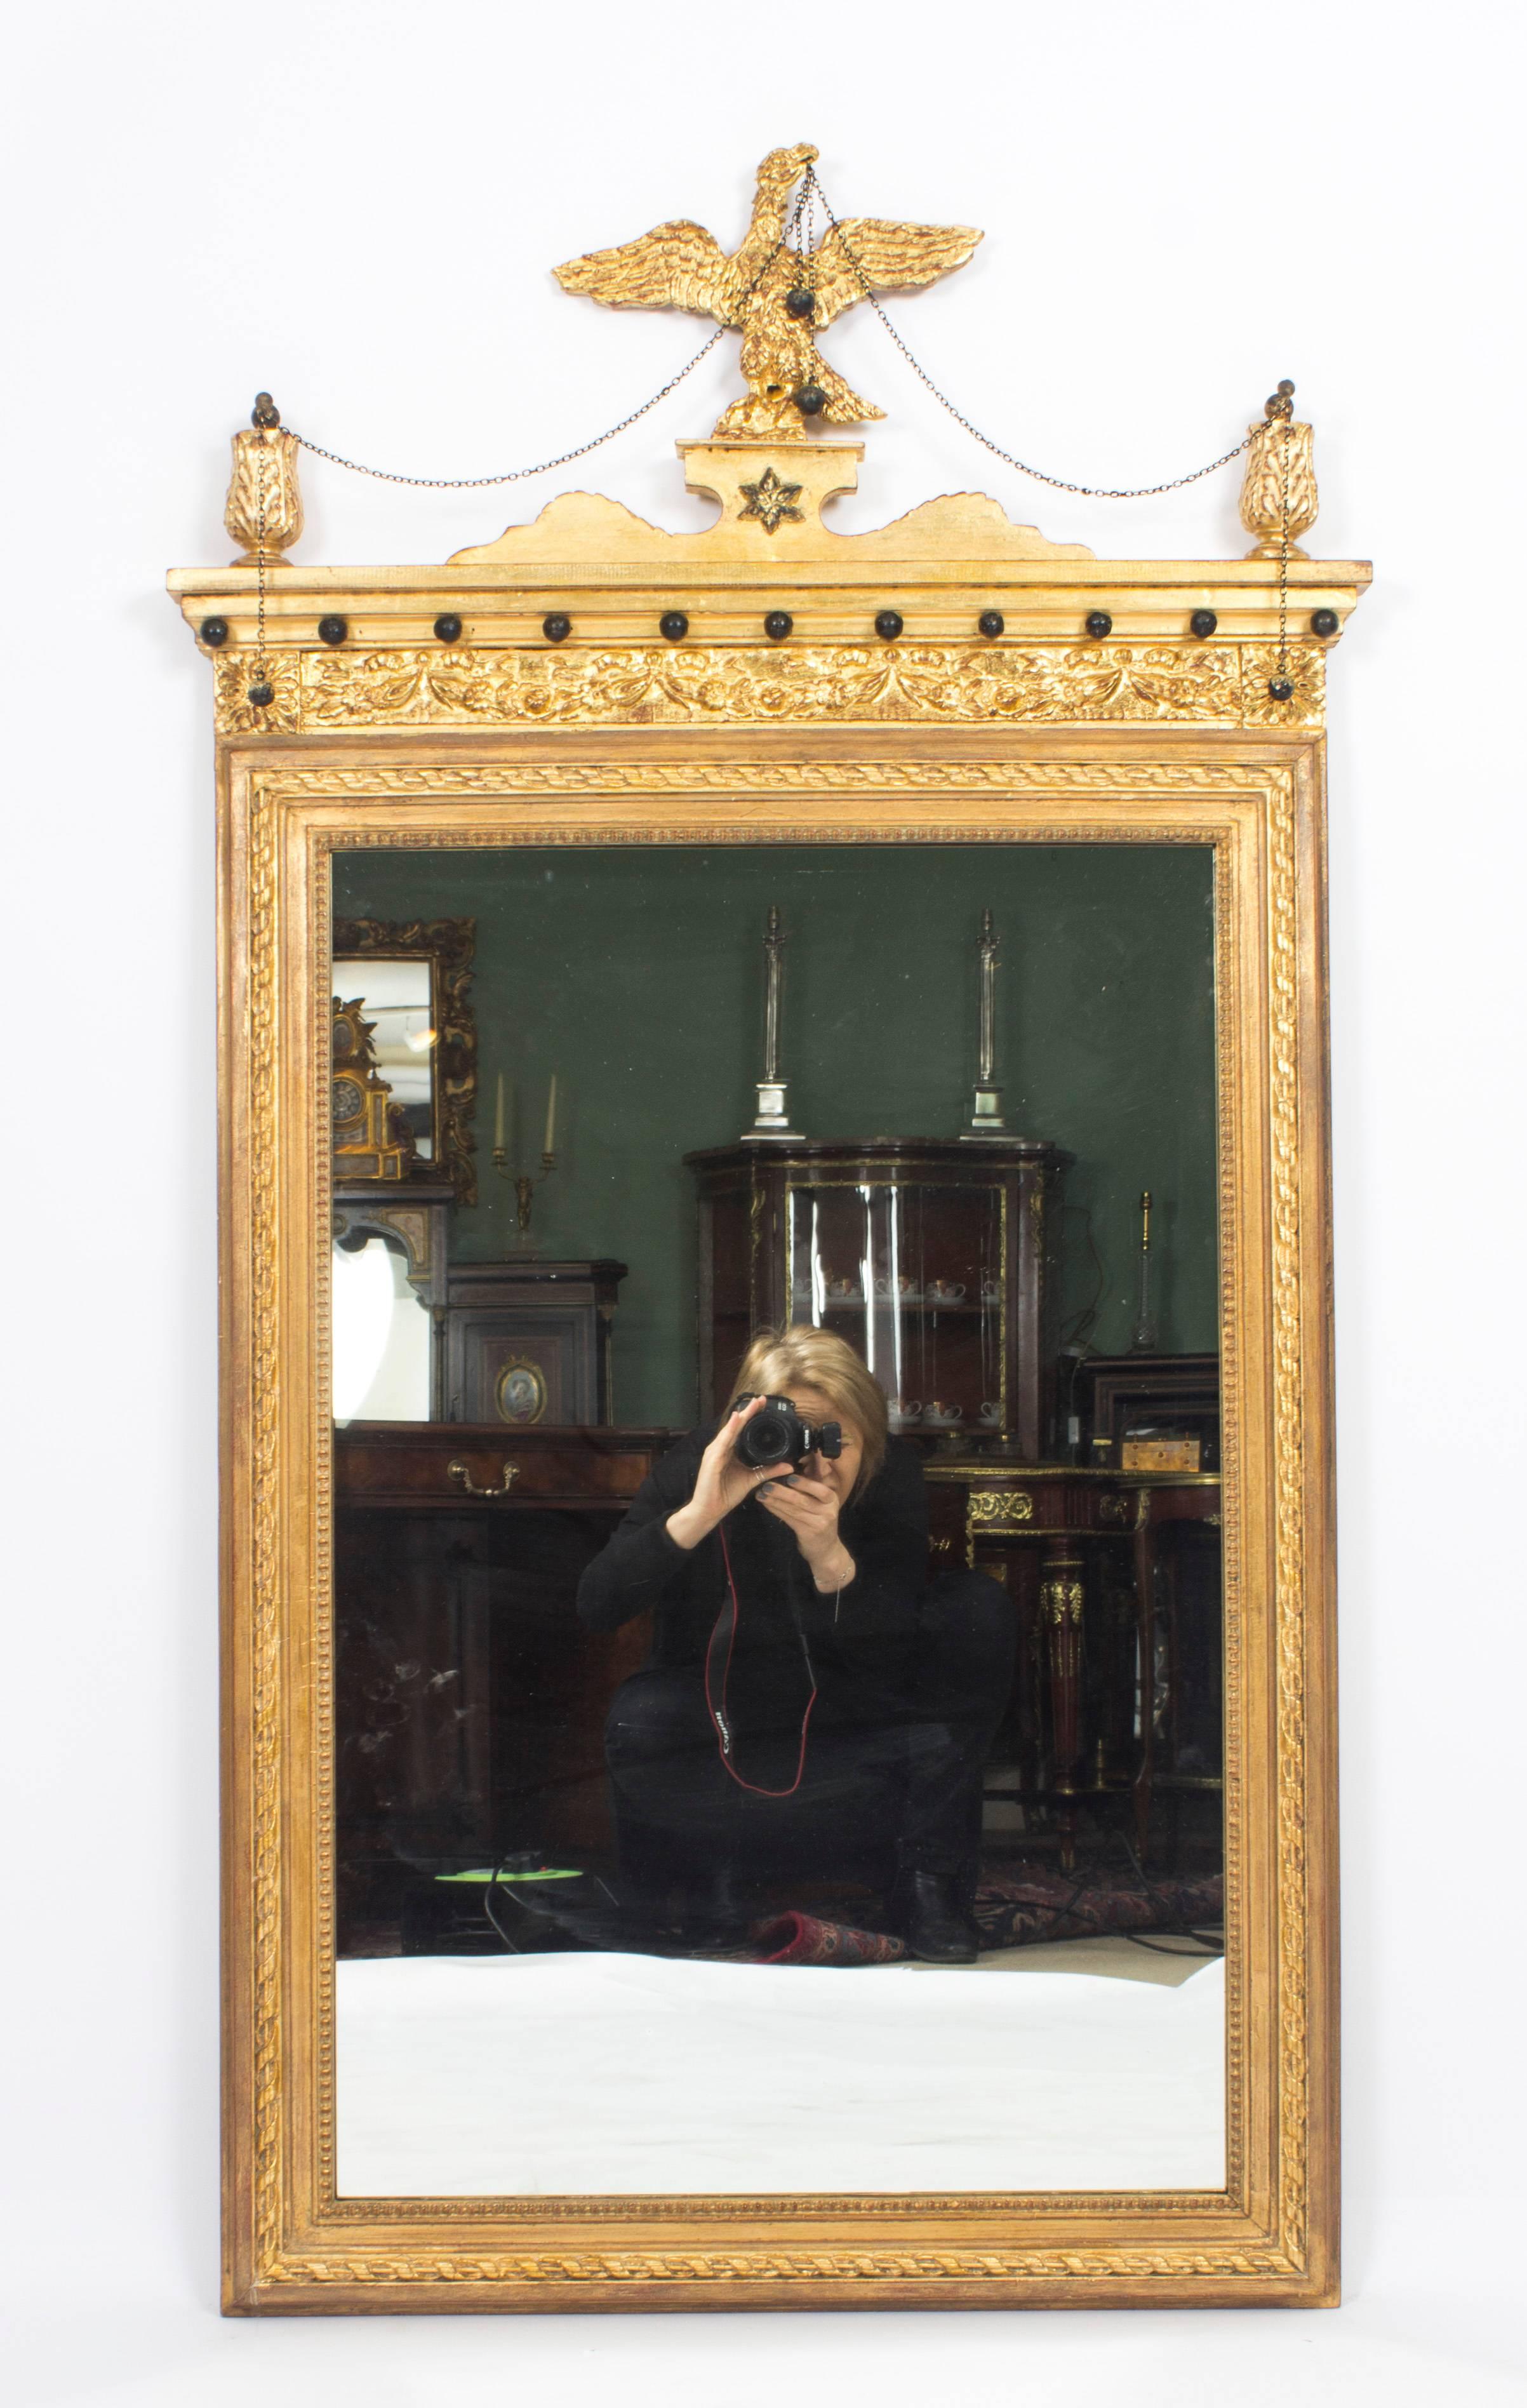 This is a beautiful antique George III style parcel gilt wall mirror, circa 1860 in date. 

The mirror has a beautiful rectangular shape decorated with a beaded egg and dart frame. The decorative cornice has ball and anthemion mounts, the top